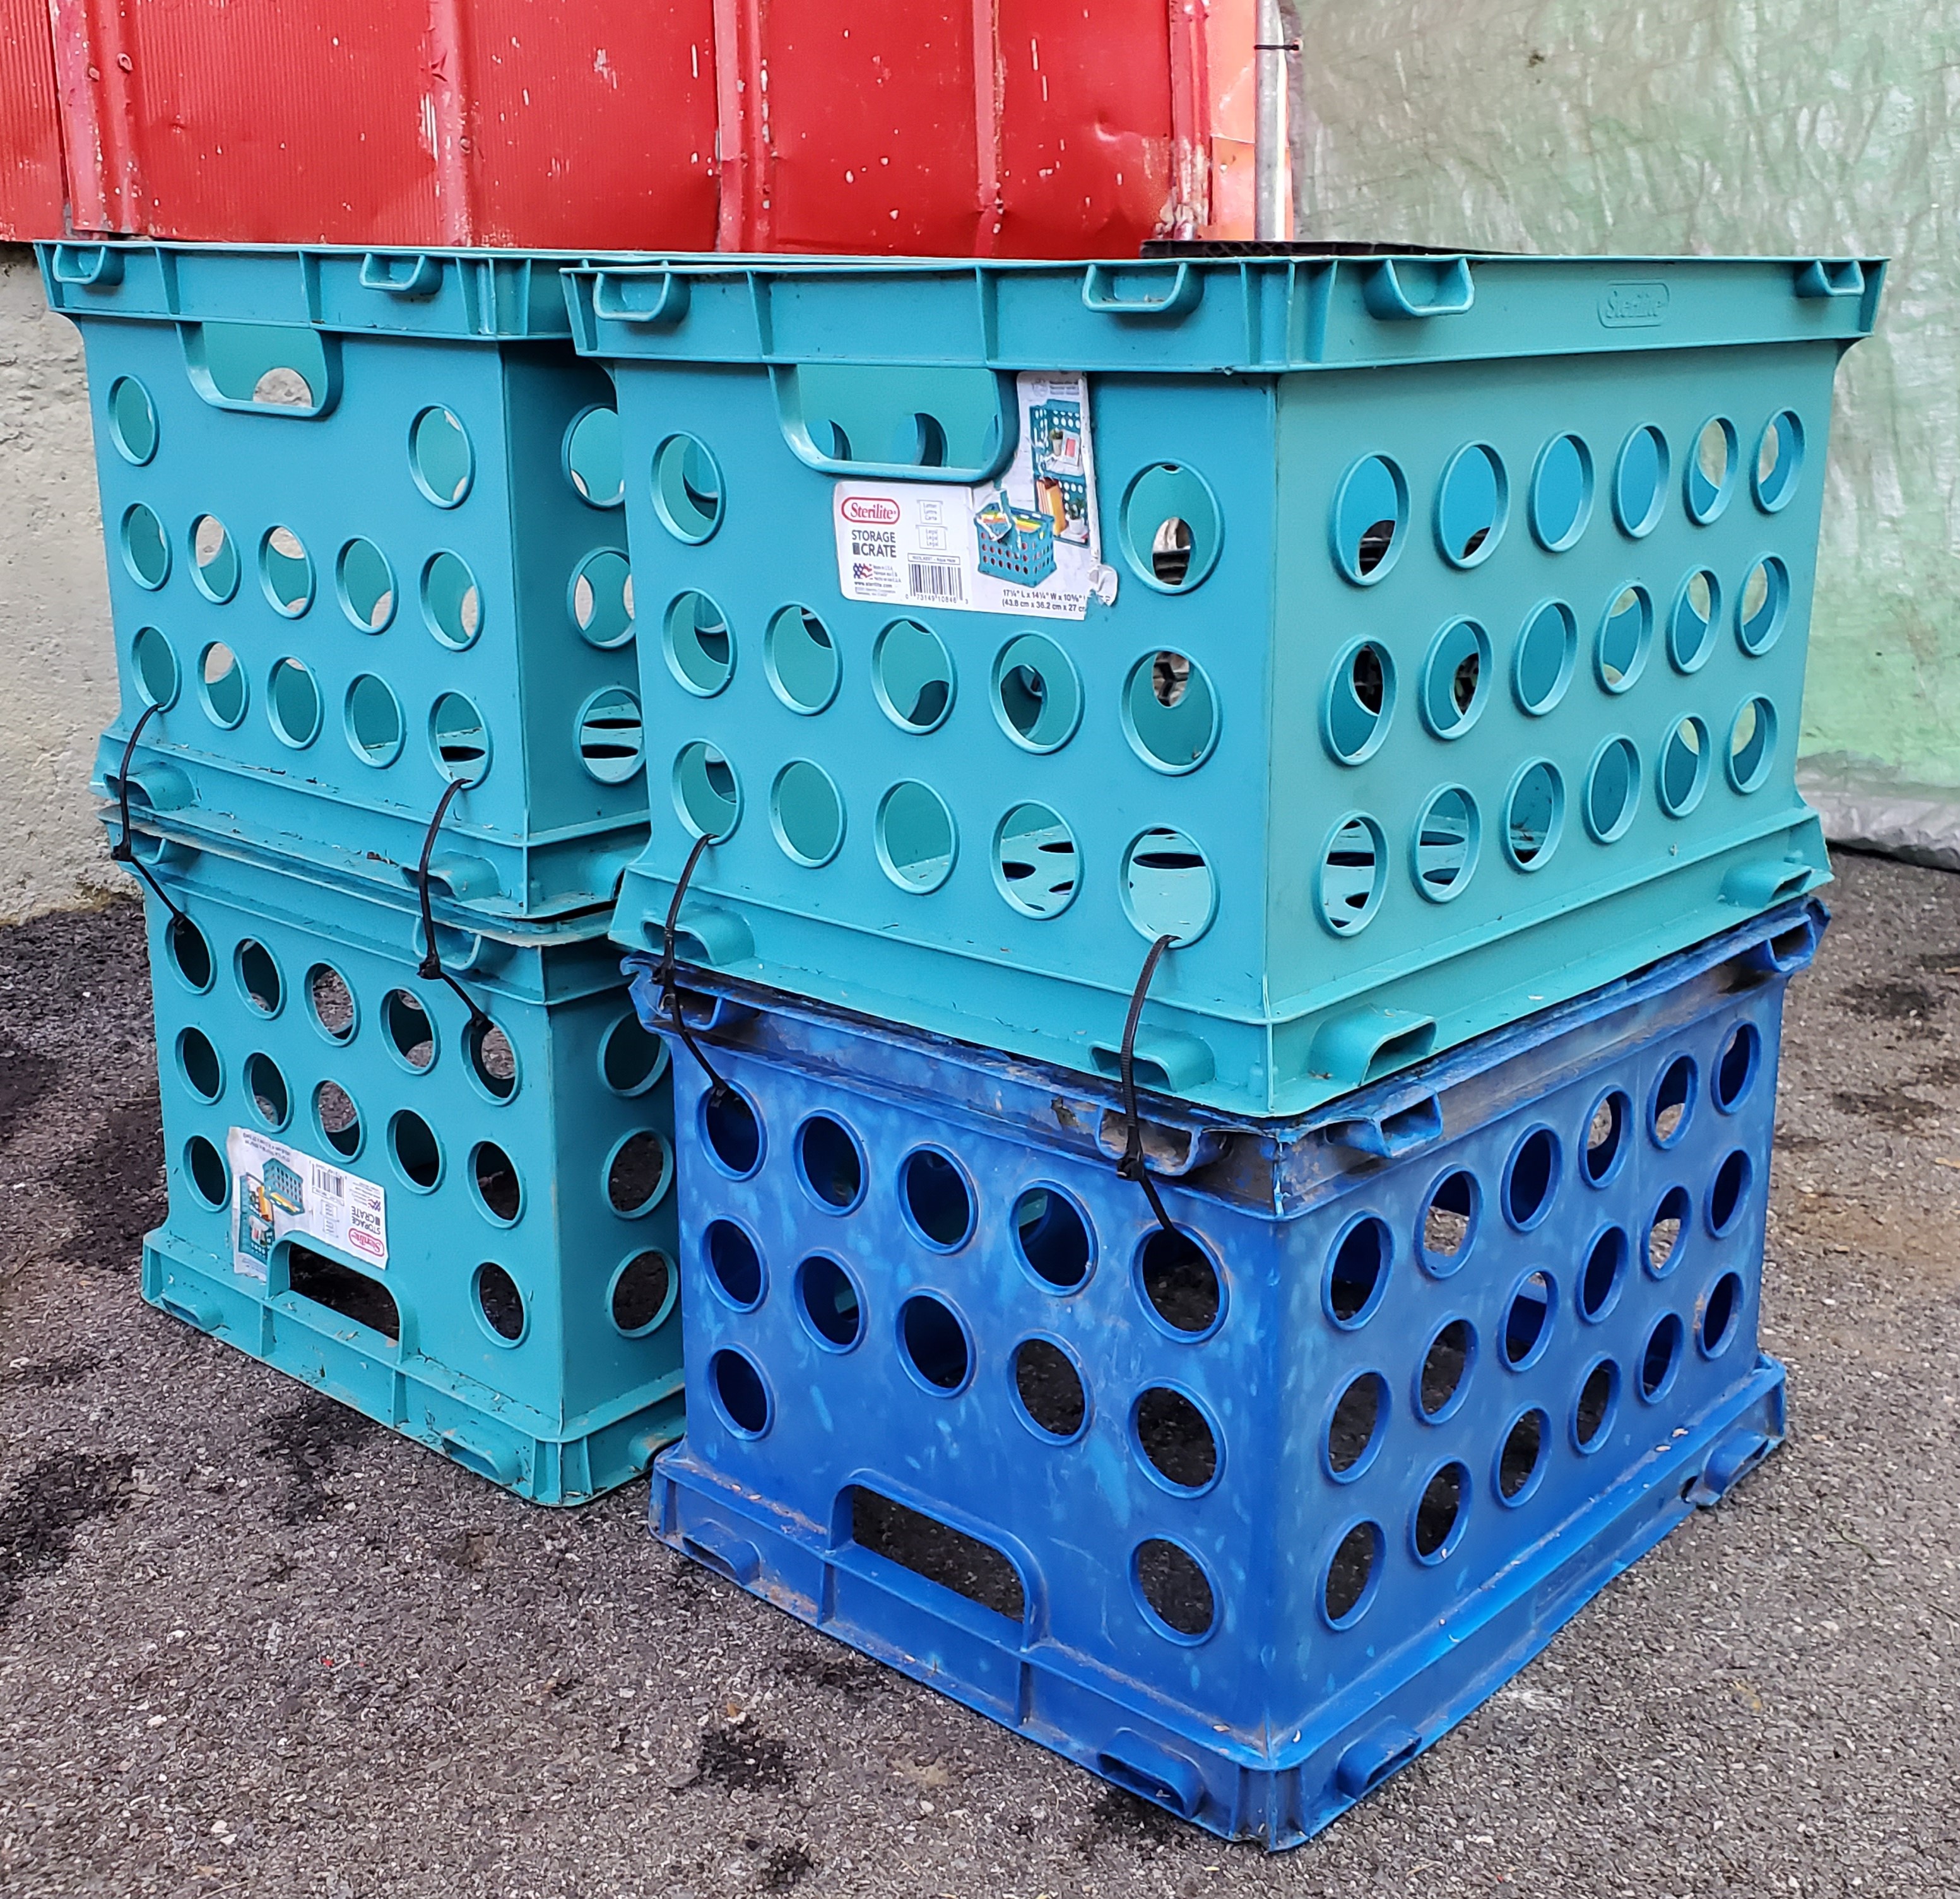 Teal and blue plastic crates stacked on an asphalt surface.